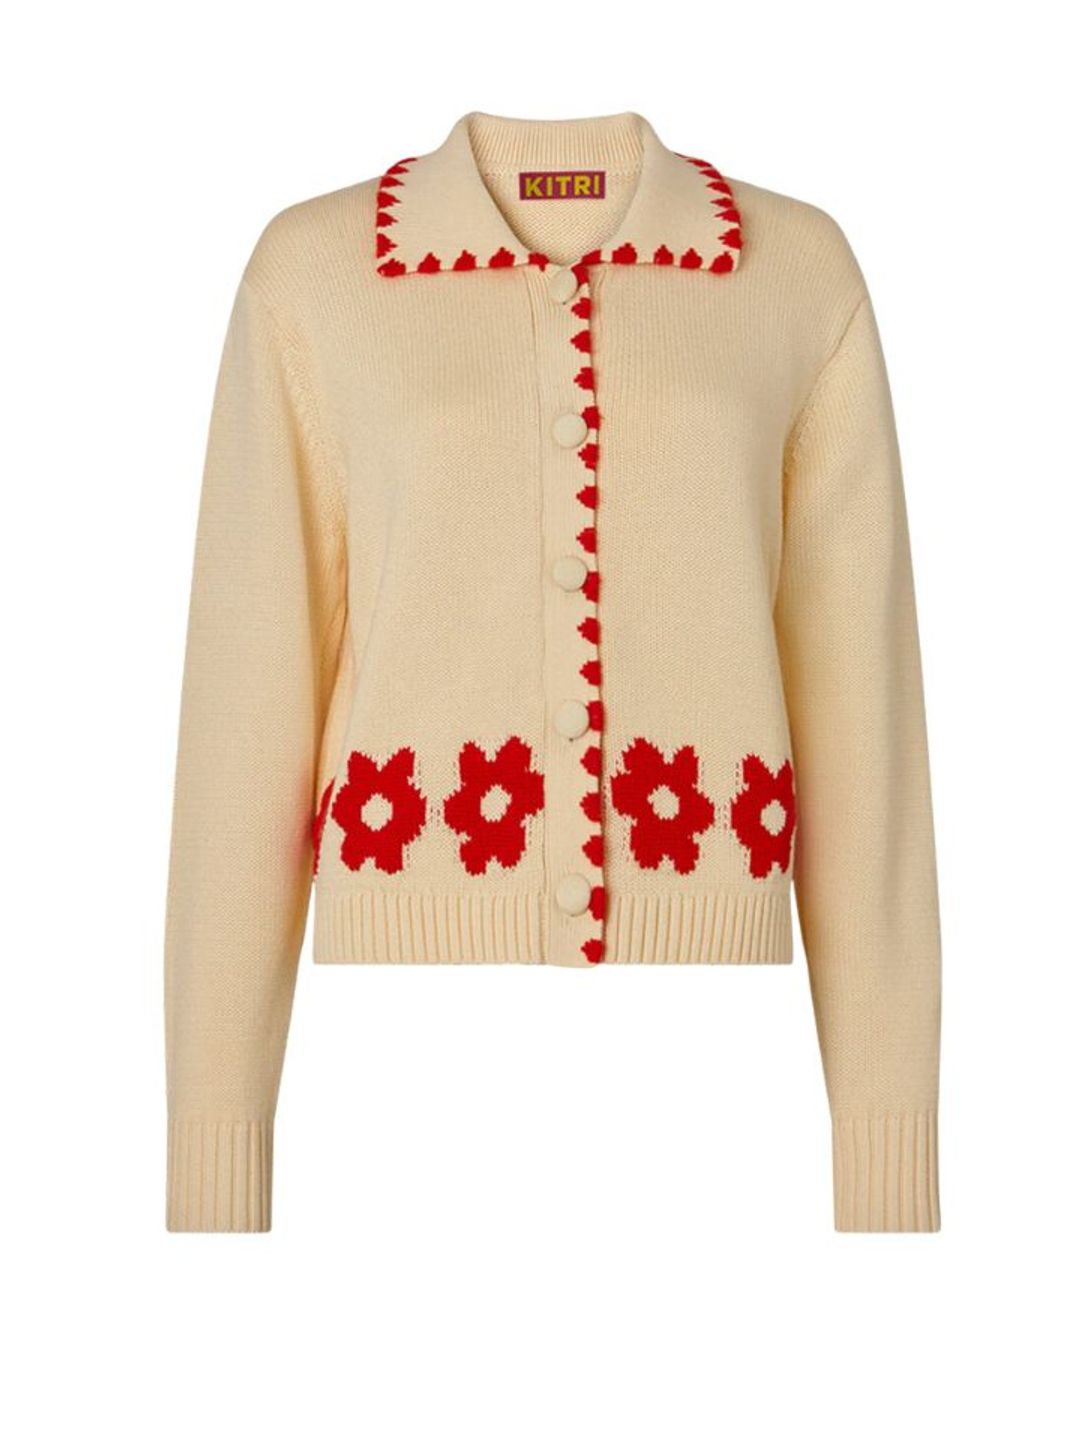 Kitri cream cardigan with red florals